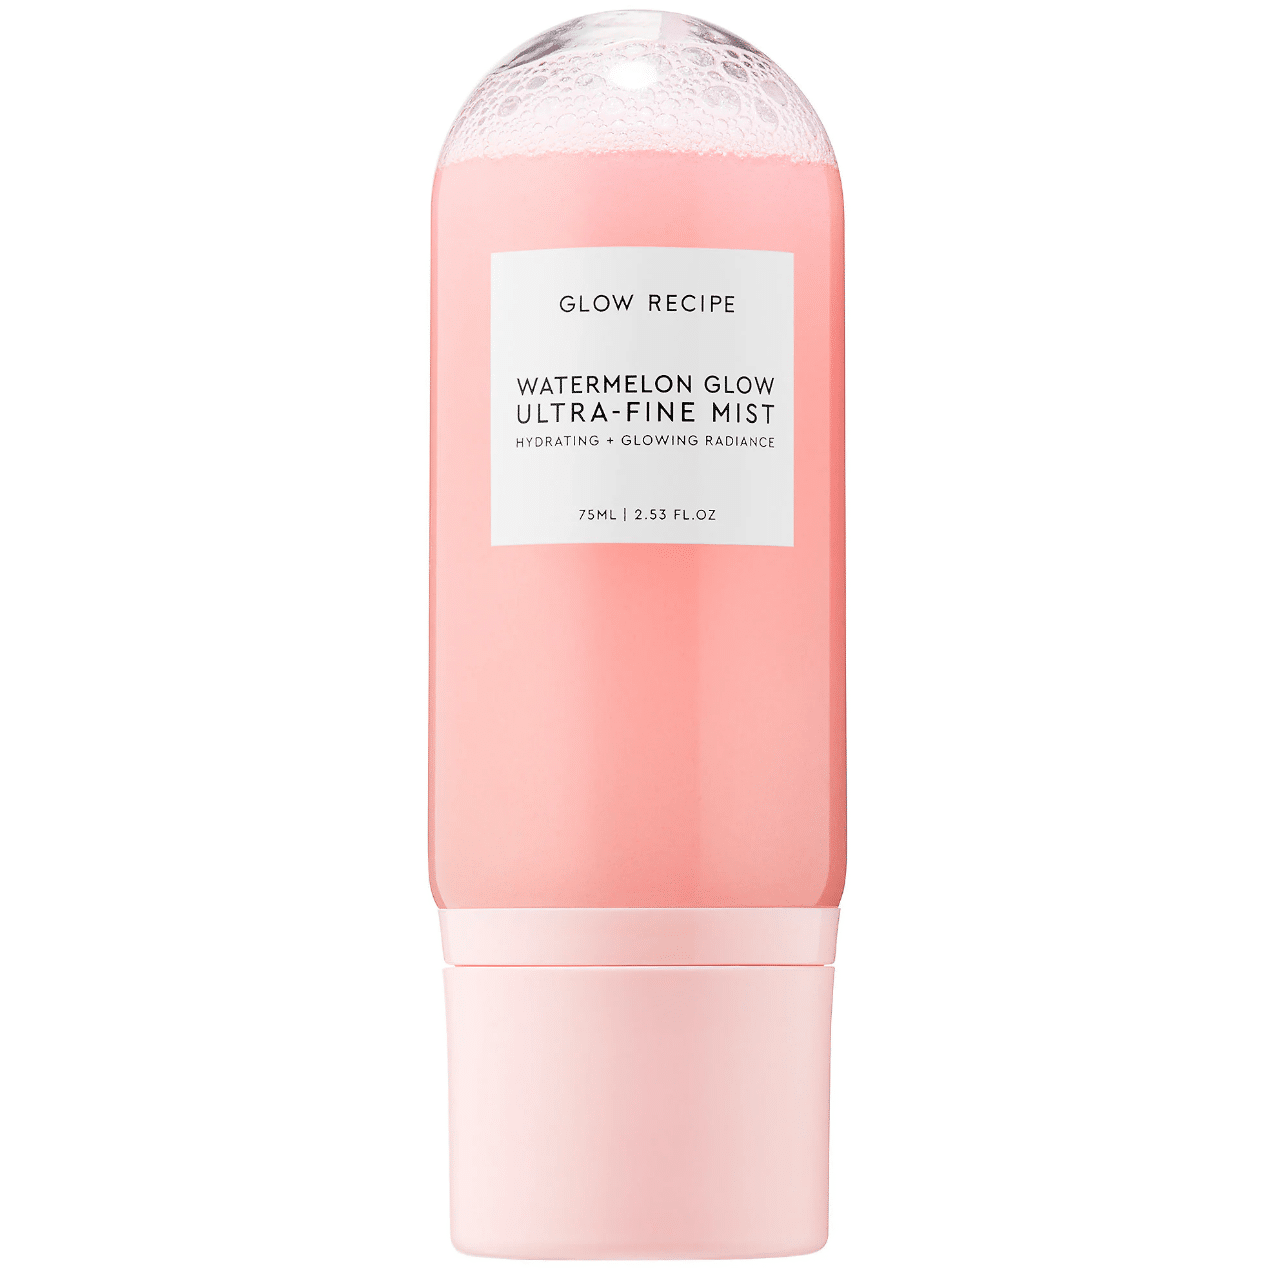 Spring Forward! 9 Brightening Products That'll Refresh Your Skin This Season